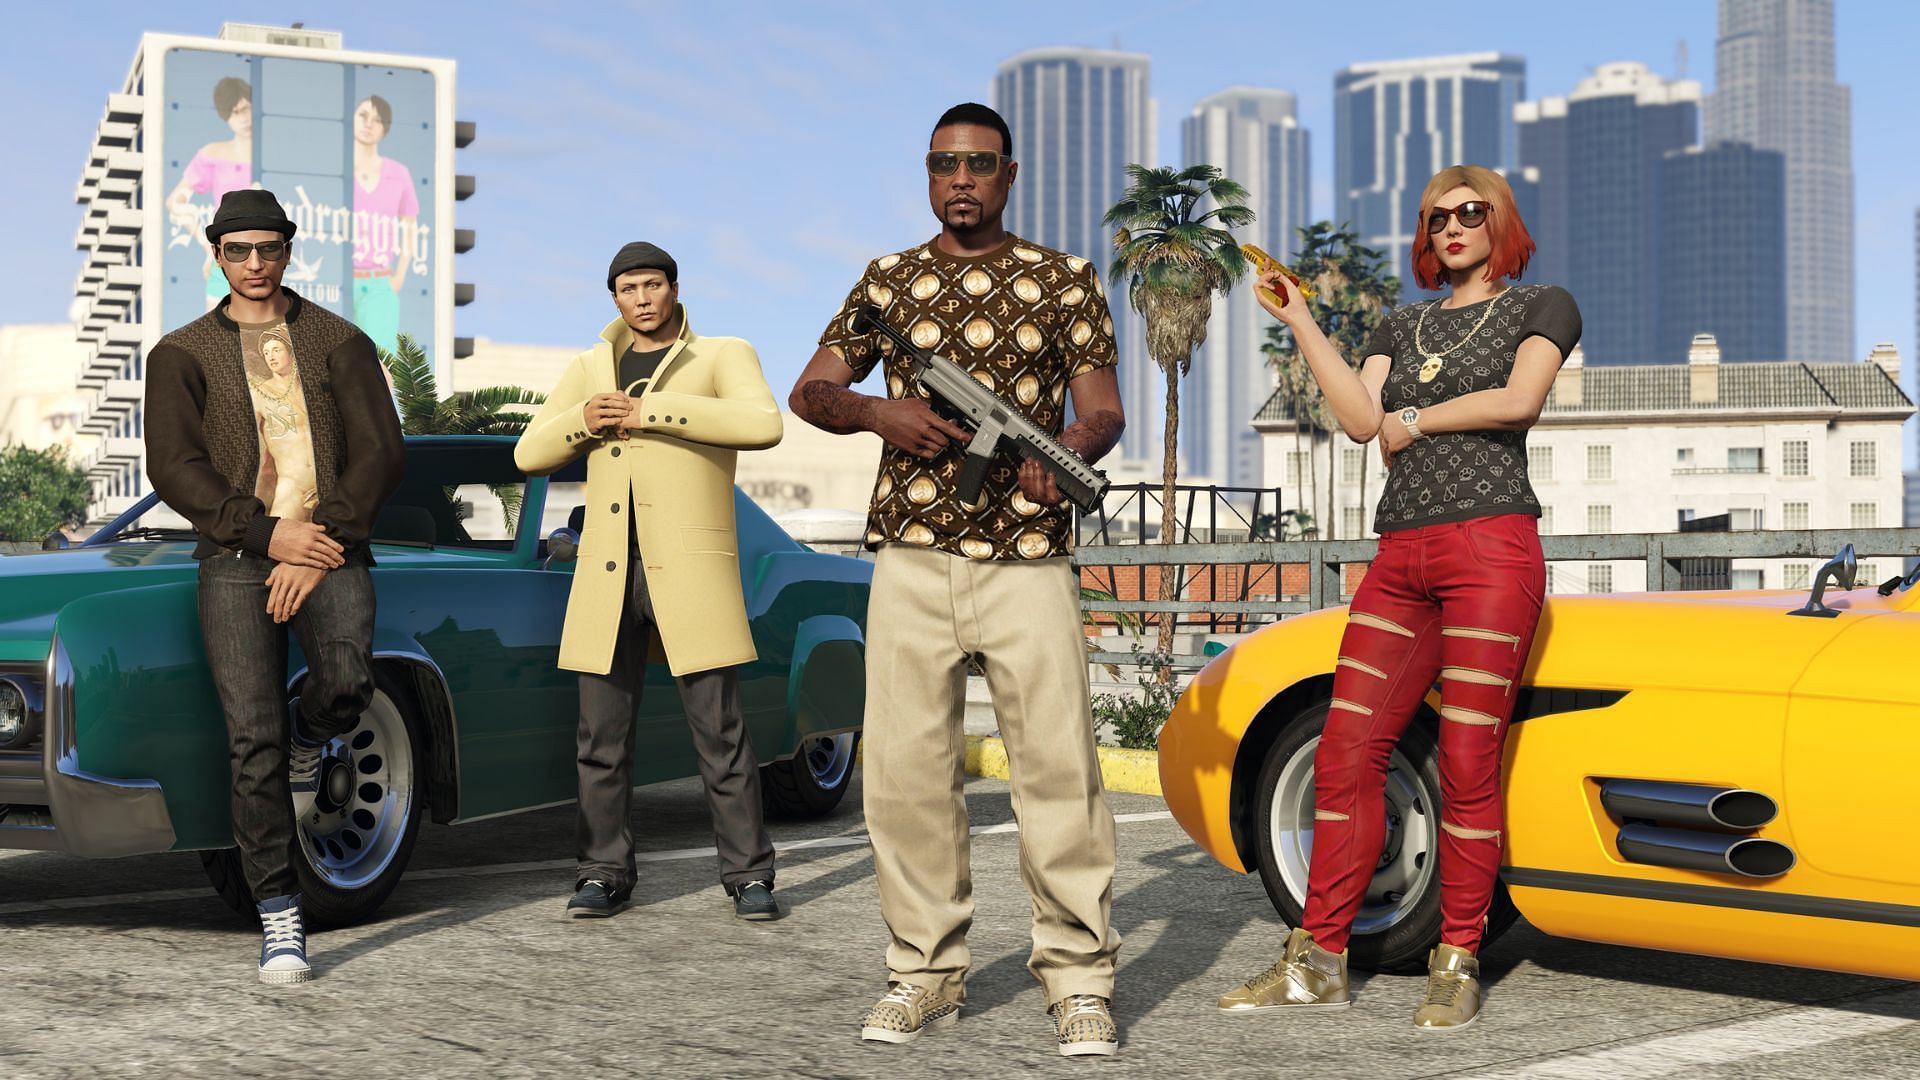 These GTA Online Outfits Grant Hidden Perks To Players - GTA BOOM